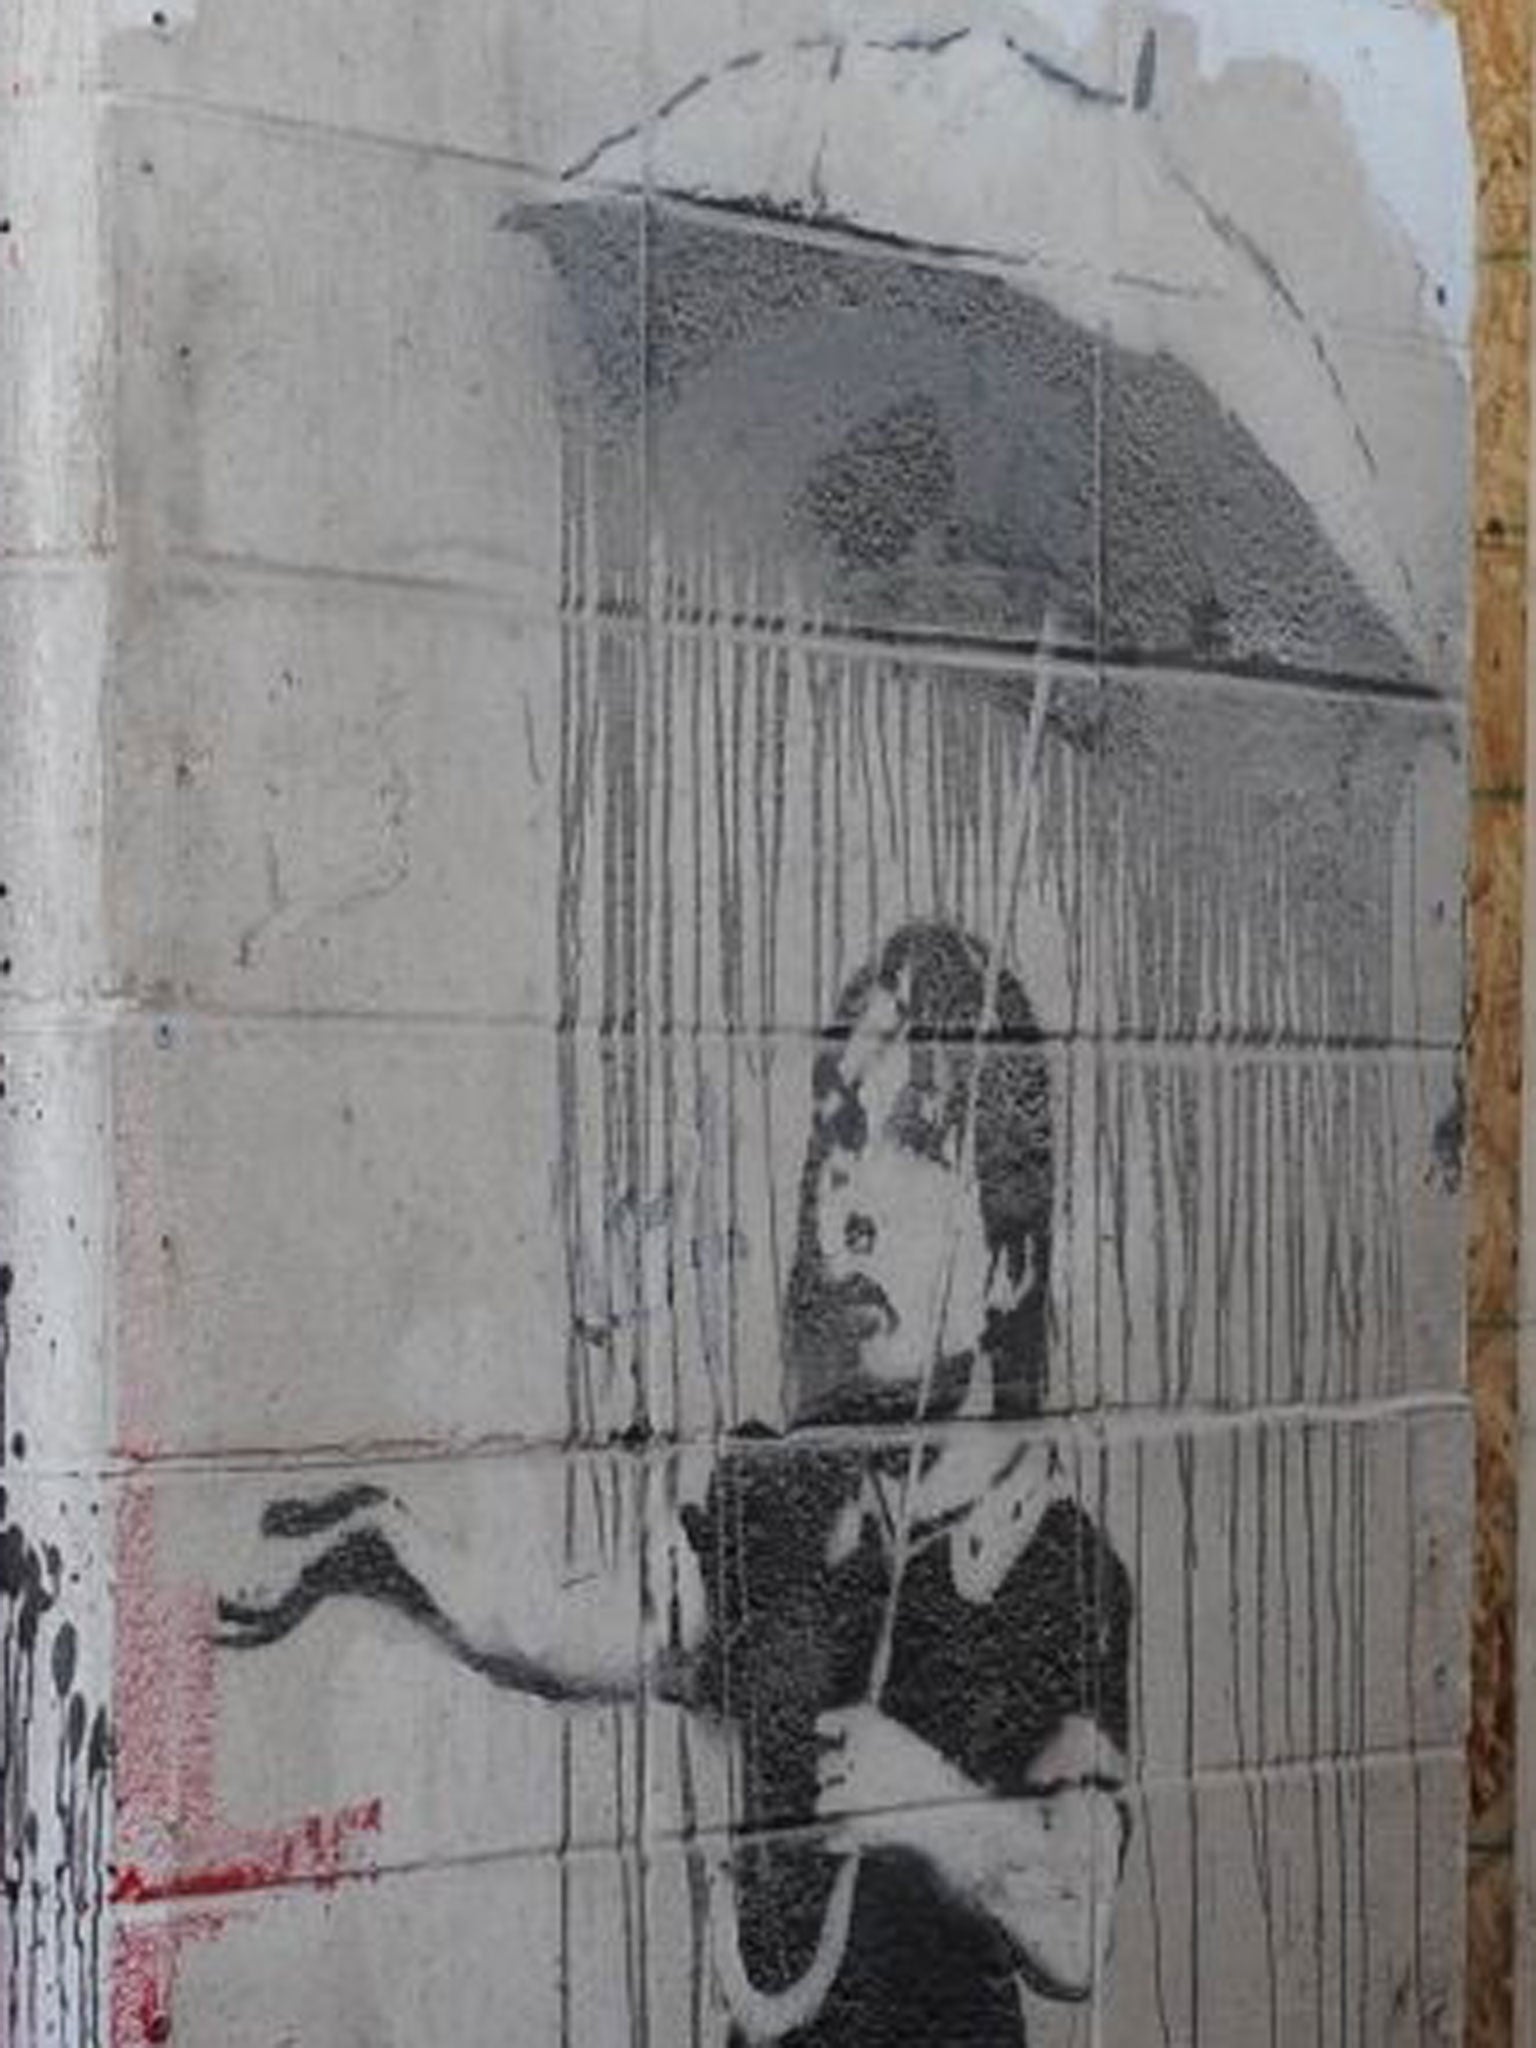 A mural by the artist Banksy, is seen in New Orleans.